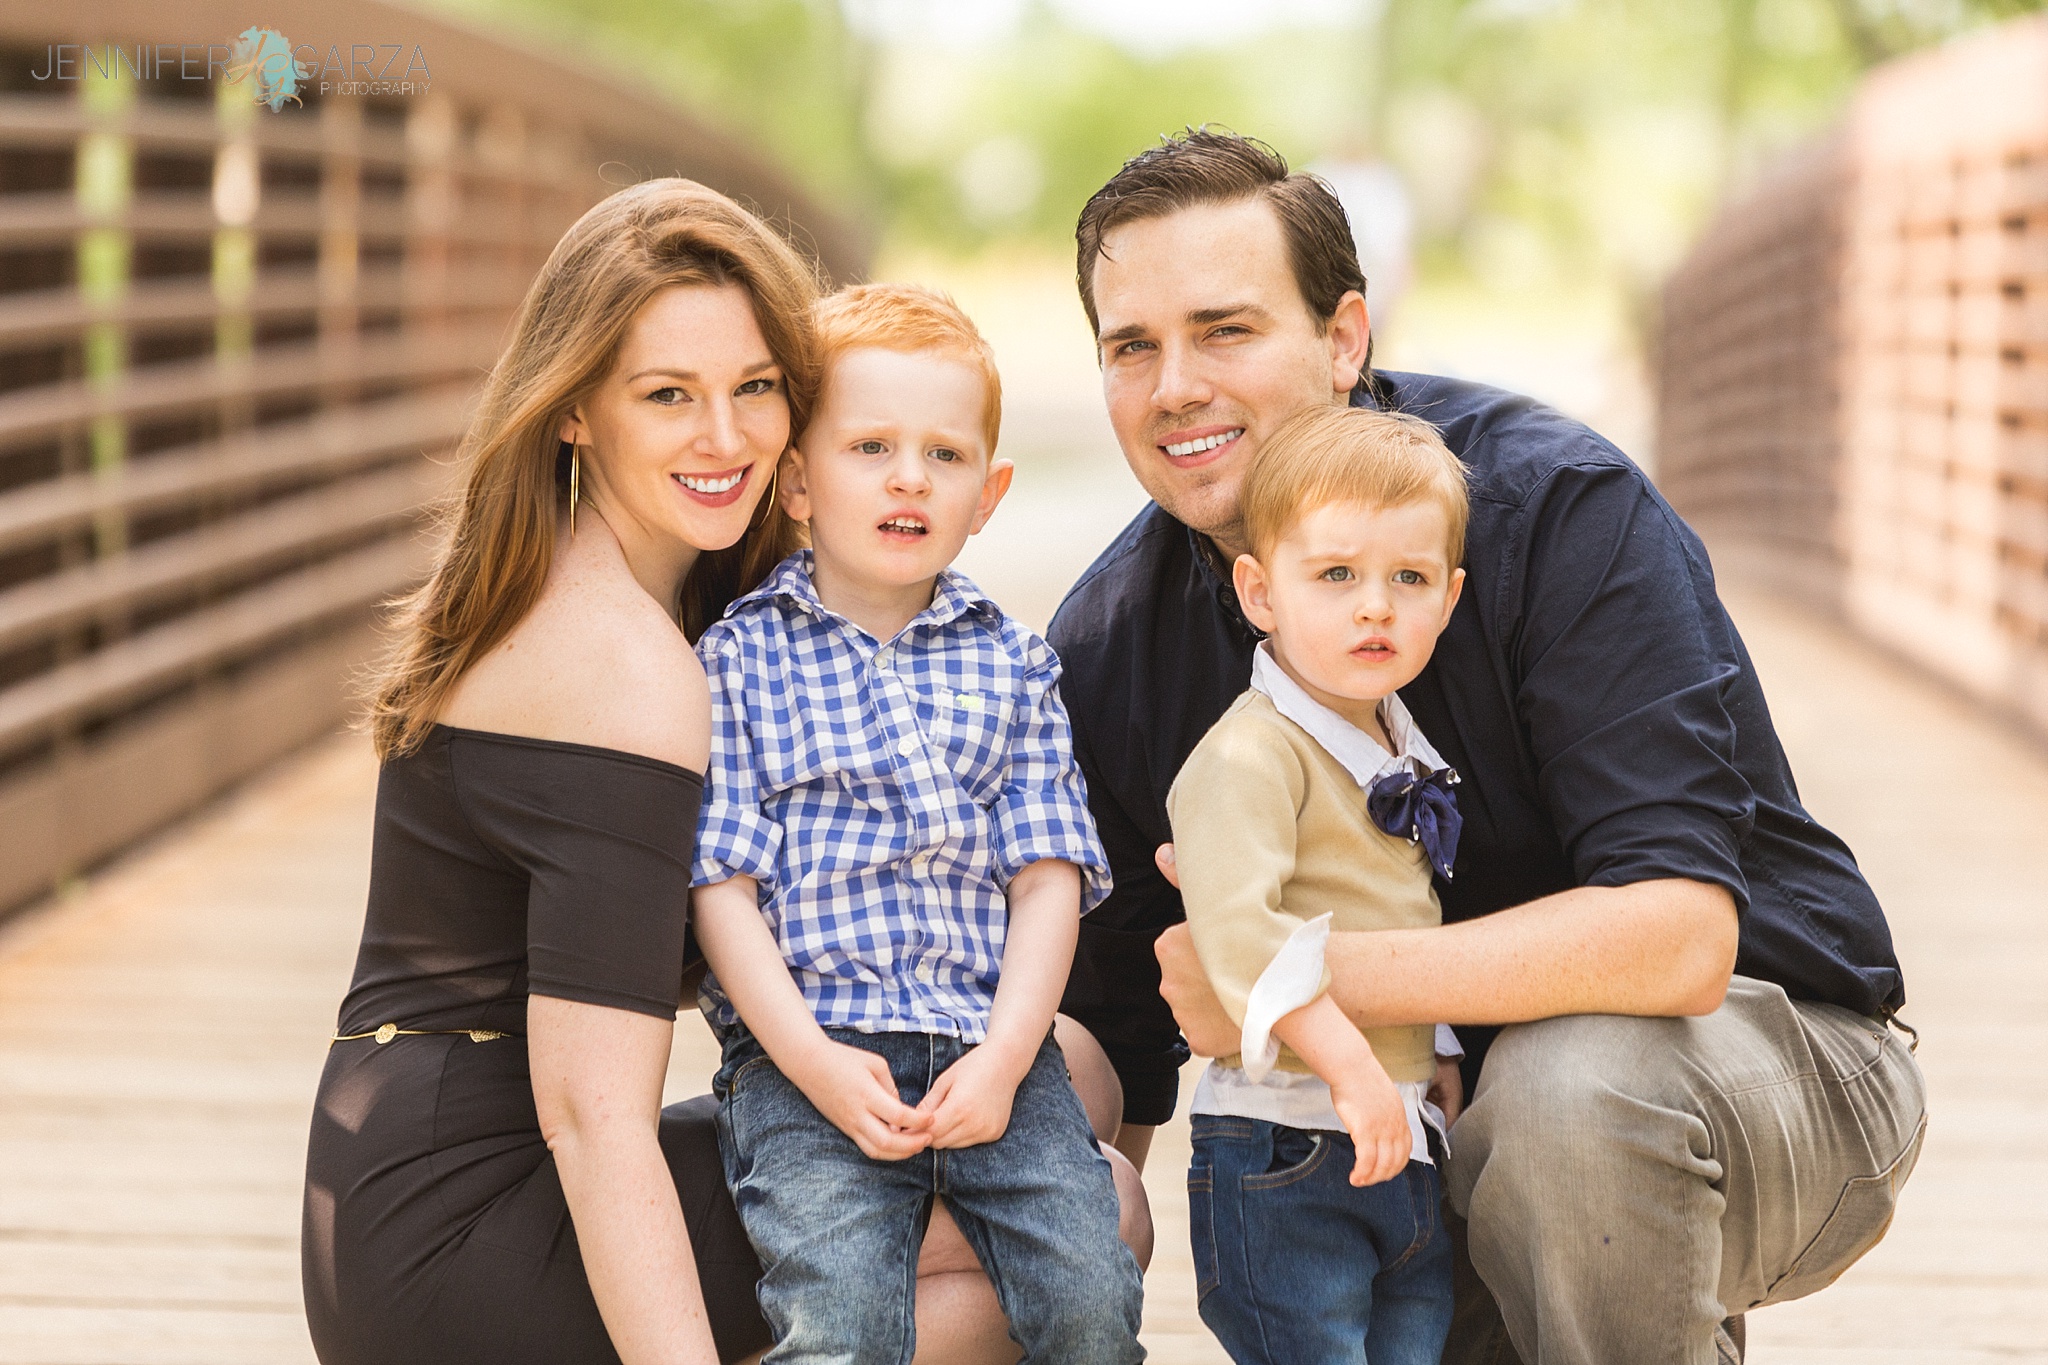 The Moffitt Family Photo Session at Golden Ponds Nature Area in Longmont, Colorado.